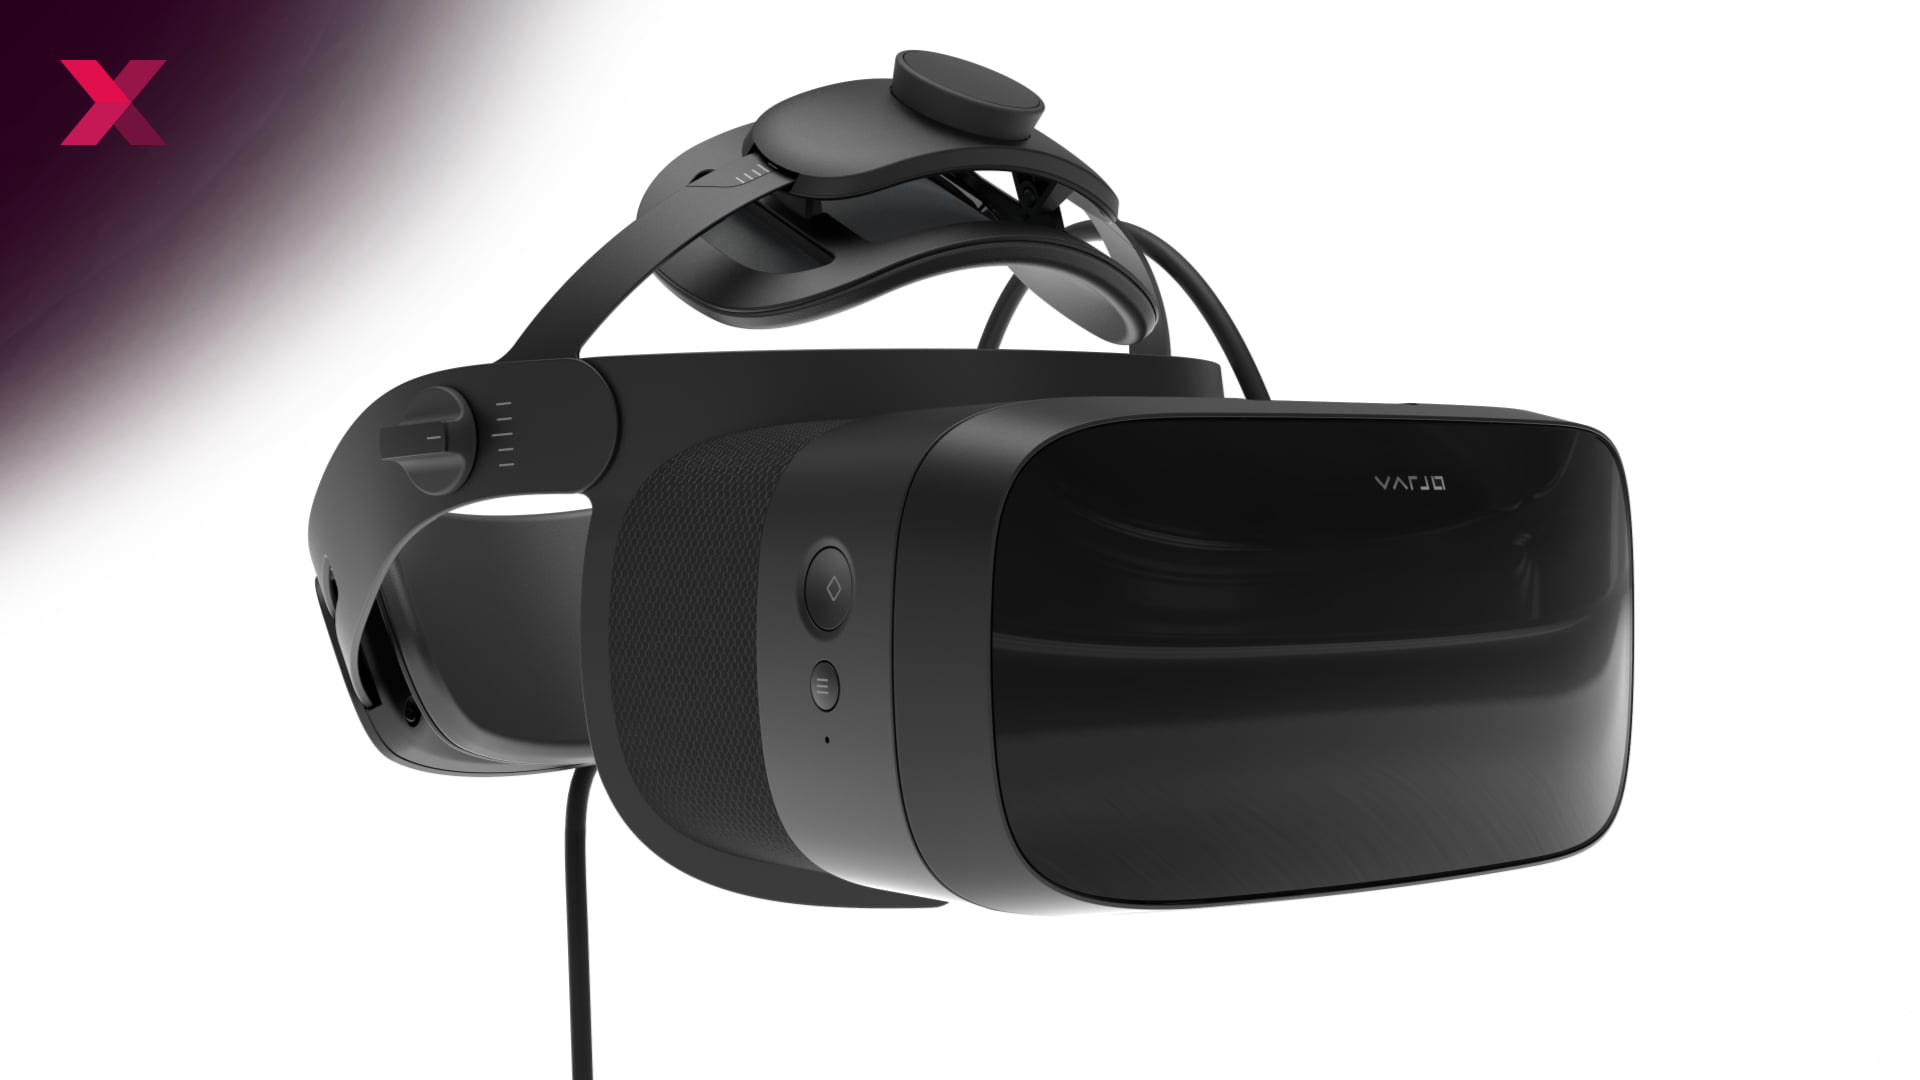 Our favorite VR headset, the Meta Quest 2, just got a permanent price drop